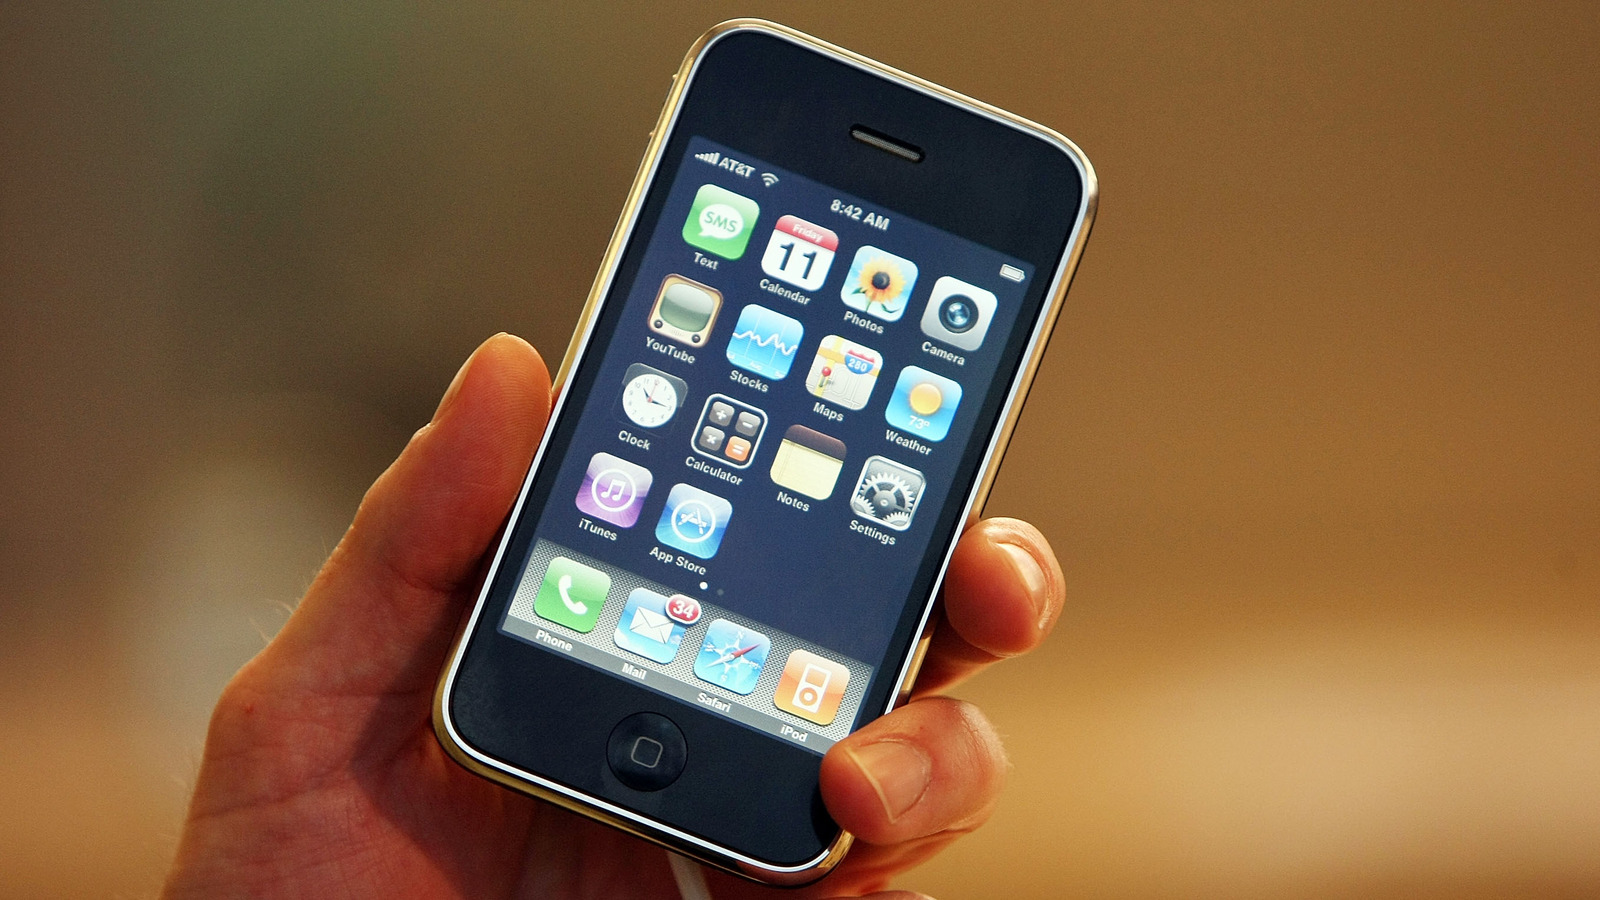 Apple iPhone 4: an object of rare beauty that leapfrogs the competition, iPhone